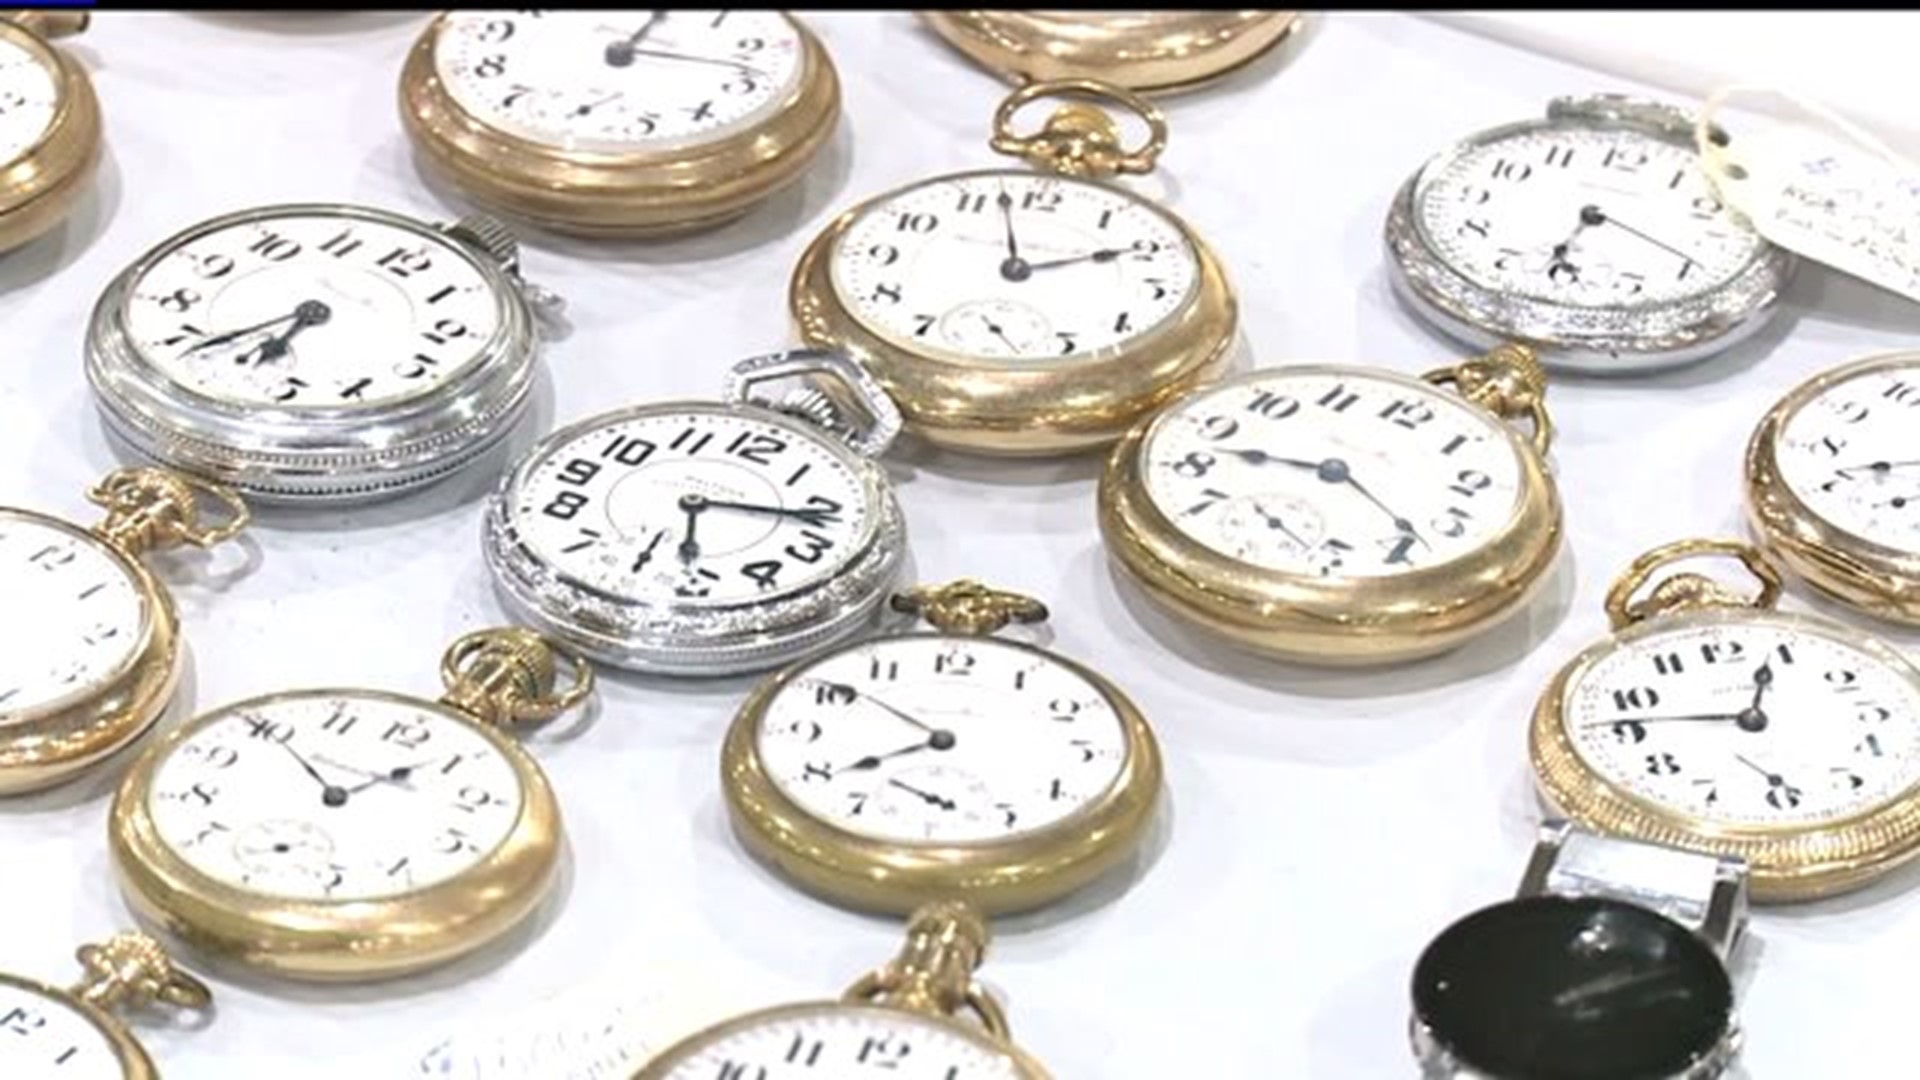 Watch and clock collectors gather to trade, sell, and buy